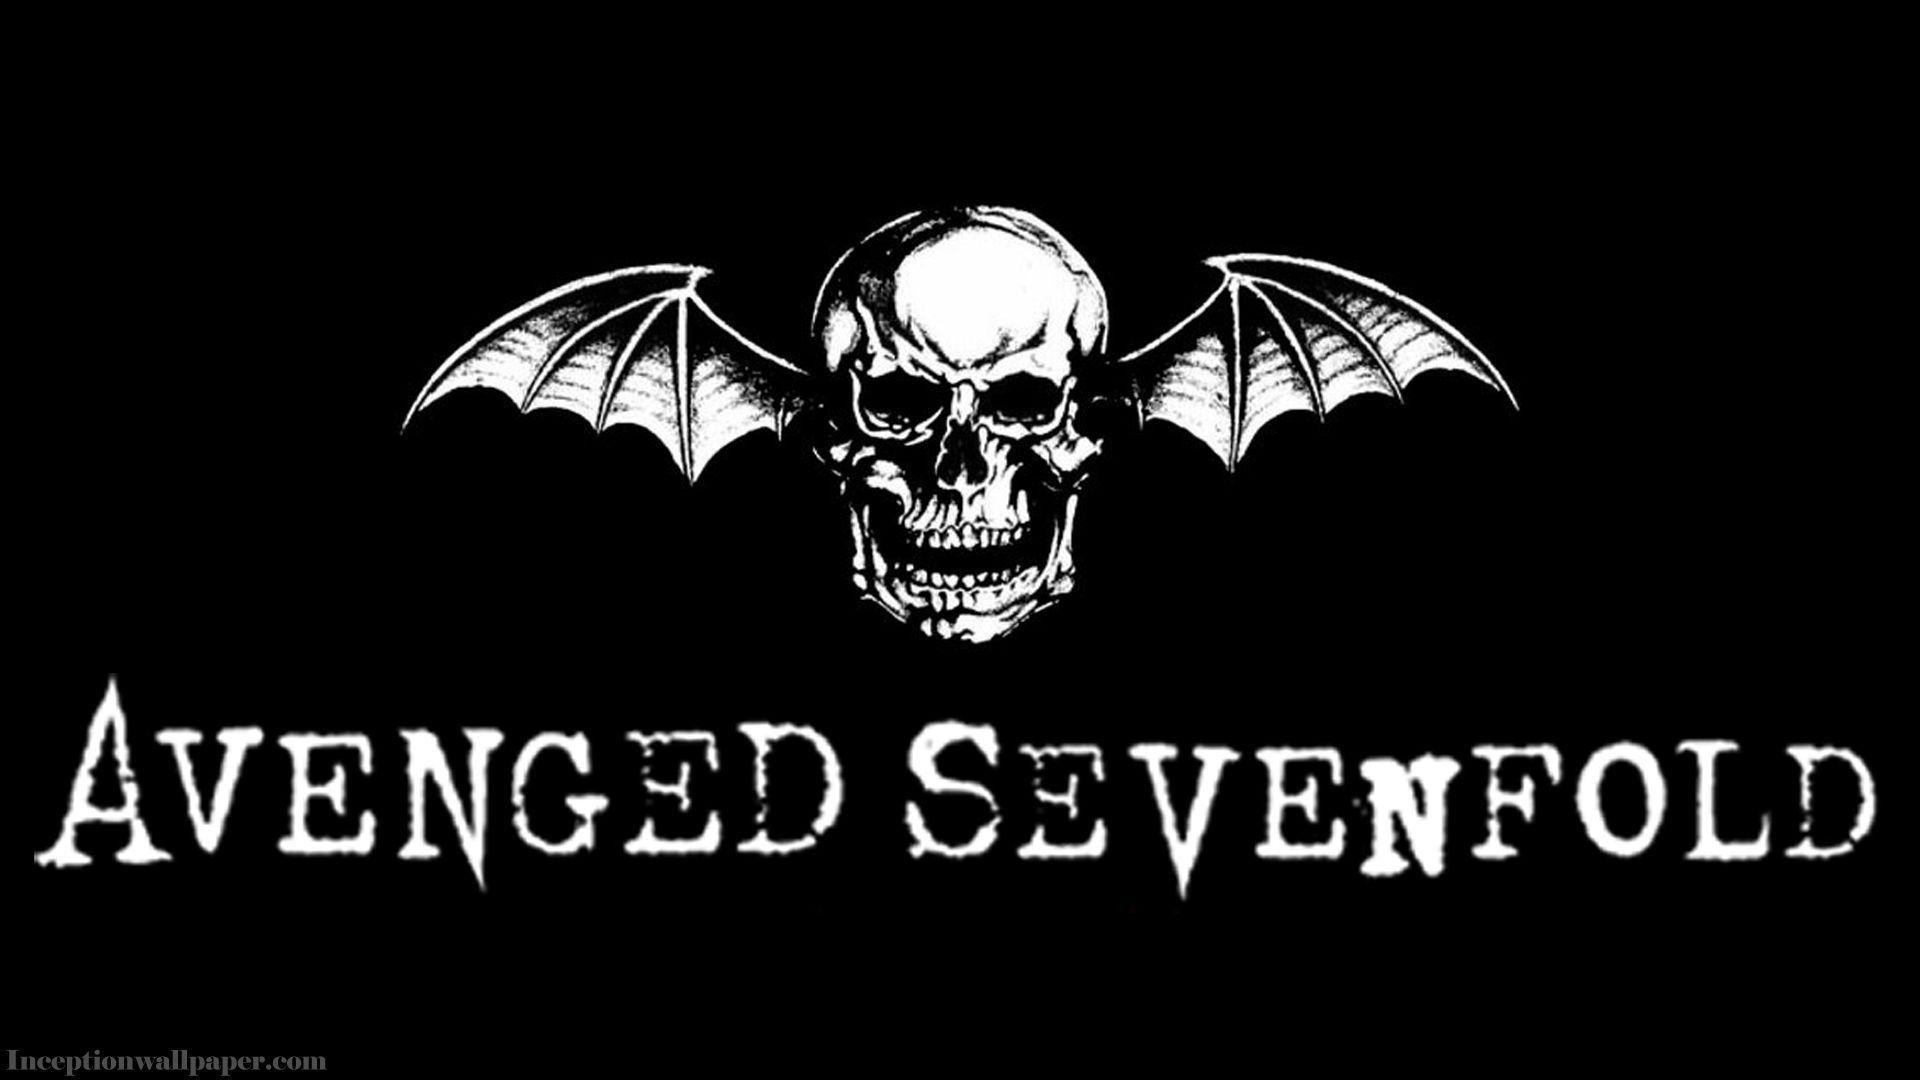 1920x1080 Avenged Sevenfold is an American / metal rock band from Huntington Beach,  California, formed in 1999. The band consists of vocalist M. Shadows, ...